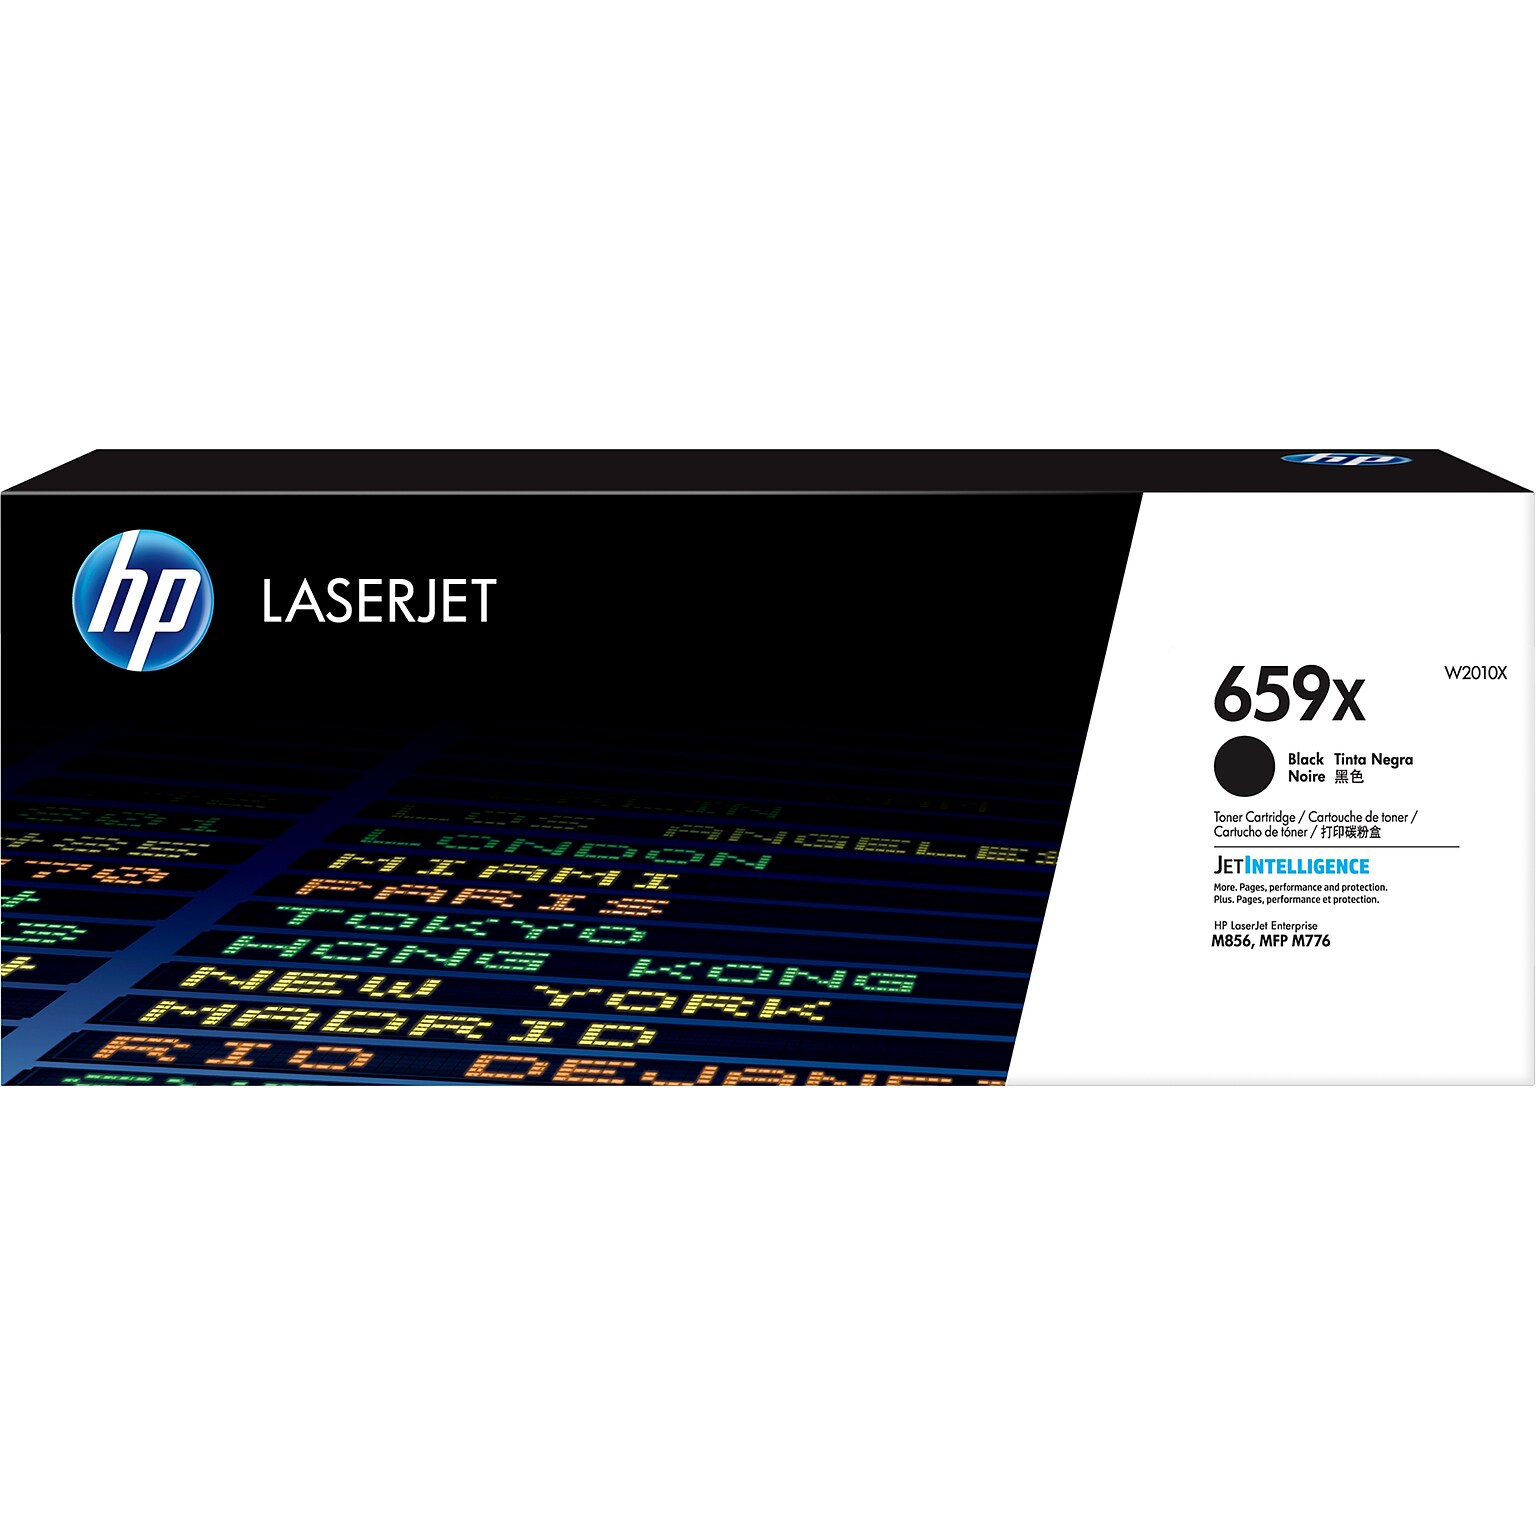 HP 659X Black High Yield Toner Cartridge, Prints Up to 34,000 Pages (W2010X)